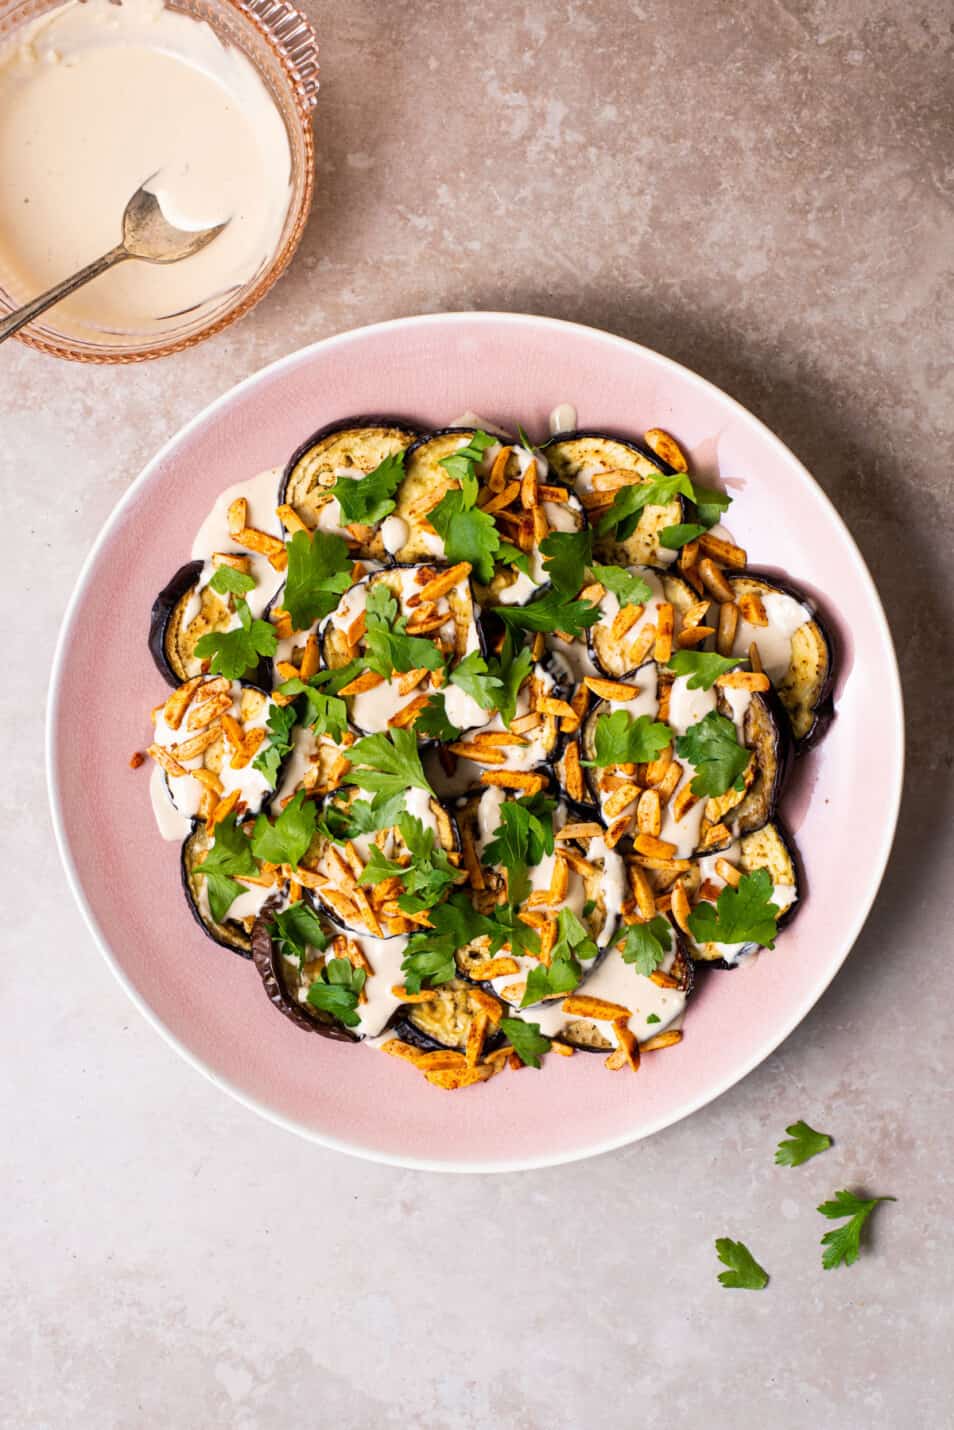 How to roast eggplant | Ottolenghi-inspired roasted eggplant rounds with tahini sauce on a pink platter